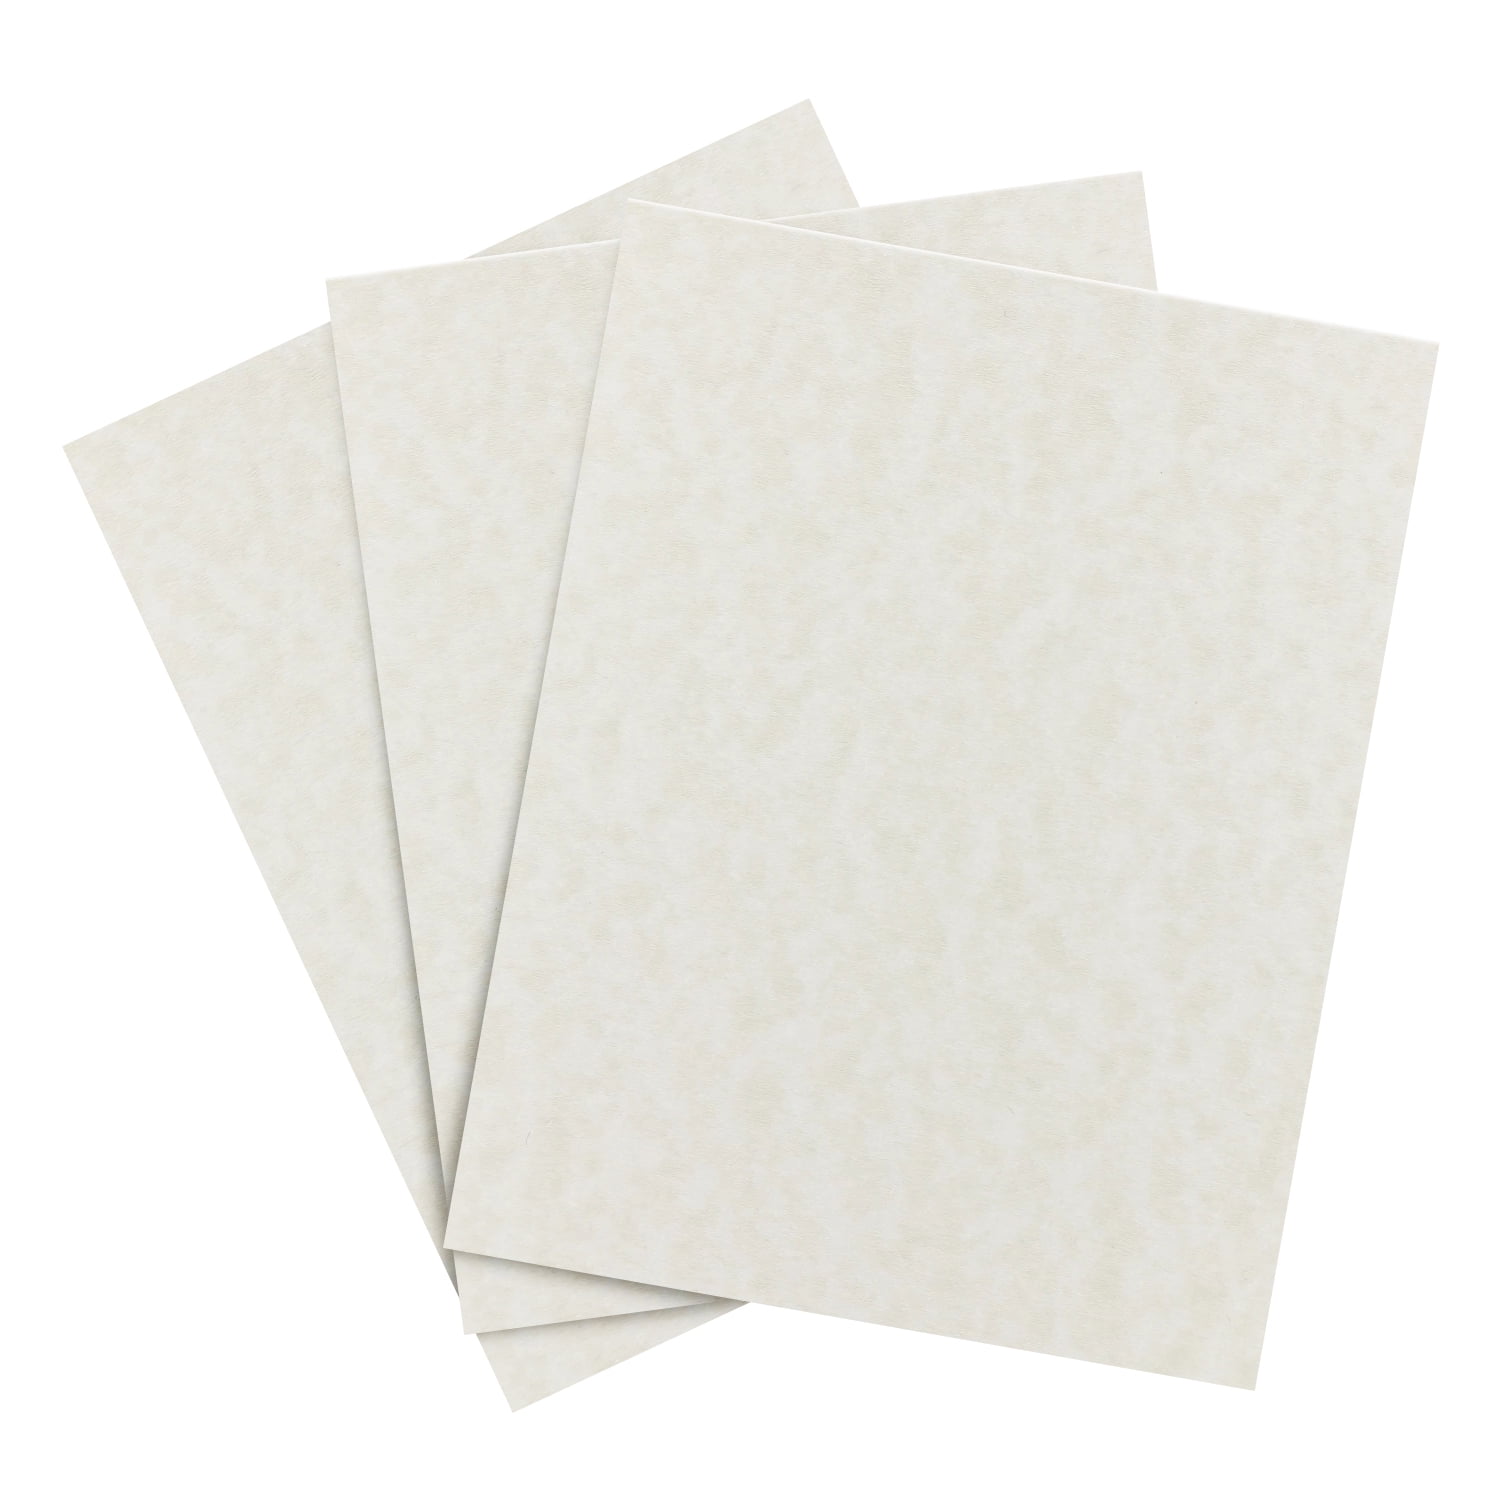 8.5 x 11” Imitation Aged Parchment Paper – for Copy, Writing, Printing |  Great for Letters, Invitations, Awards and Certificates | 24lb Bond / 60lb